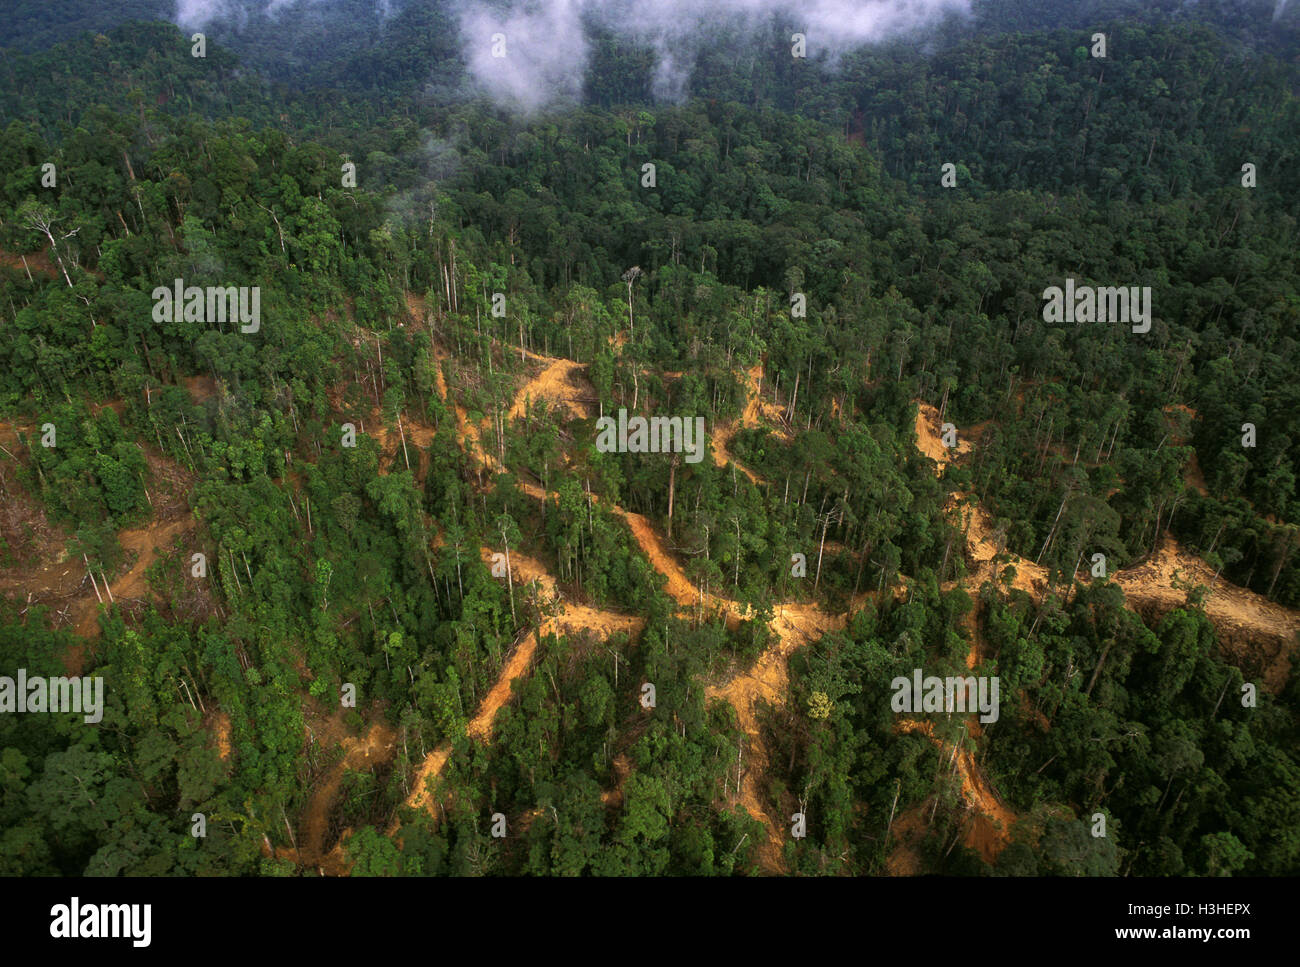 Lowland tropical rainforest with logging access roads, skid trails and log landings visible, Stock Photo